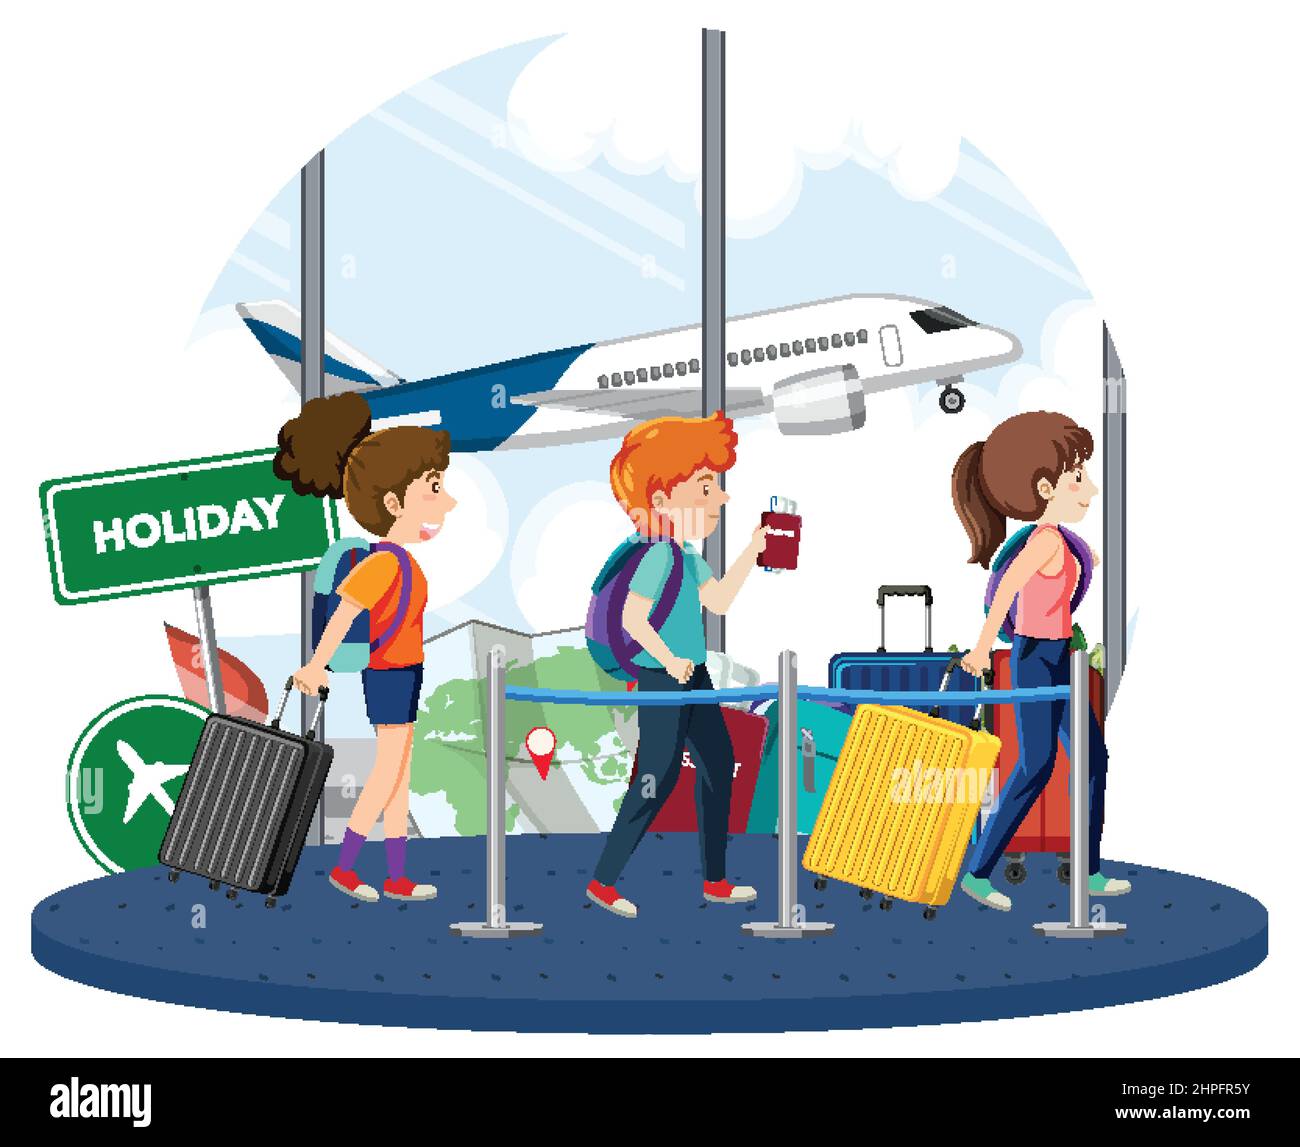 Passengers waiting in a line at airport illustration Stock Vector